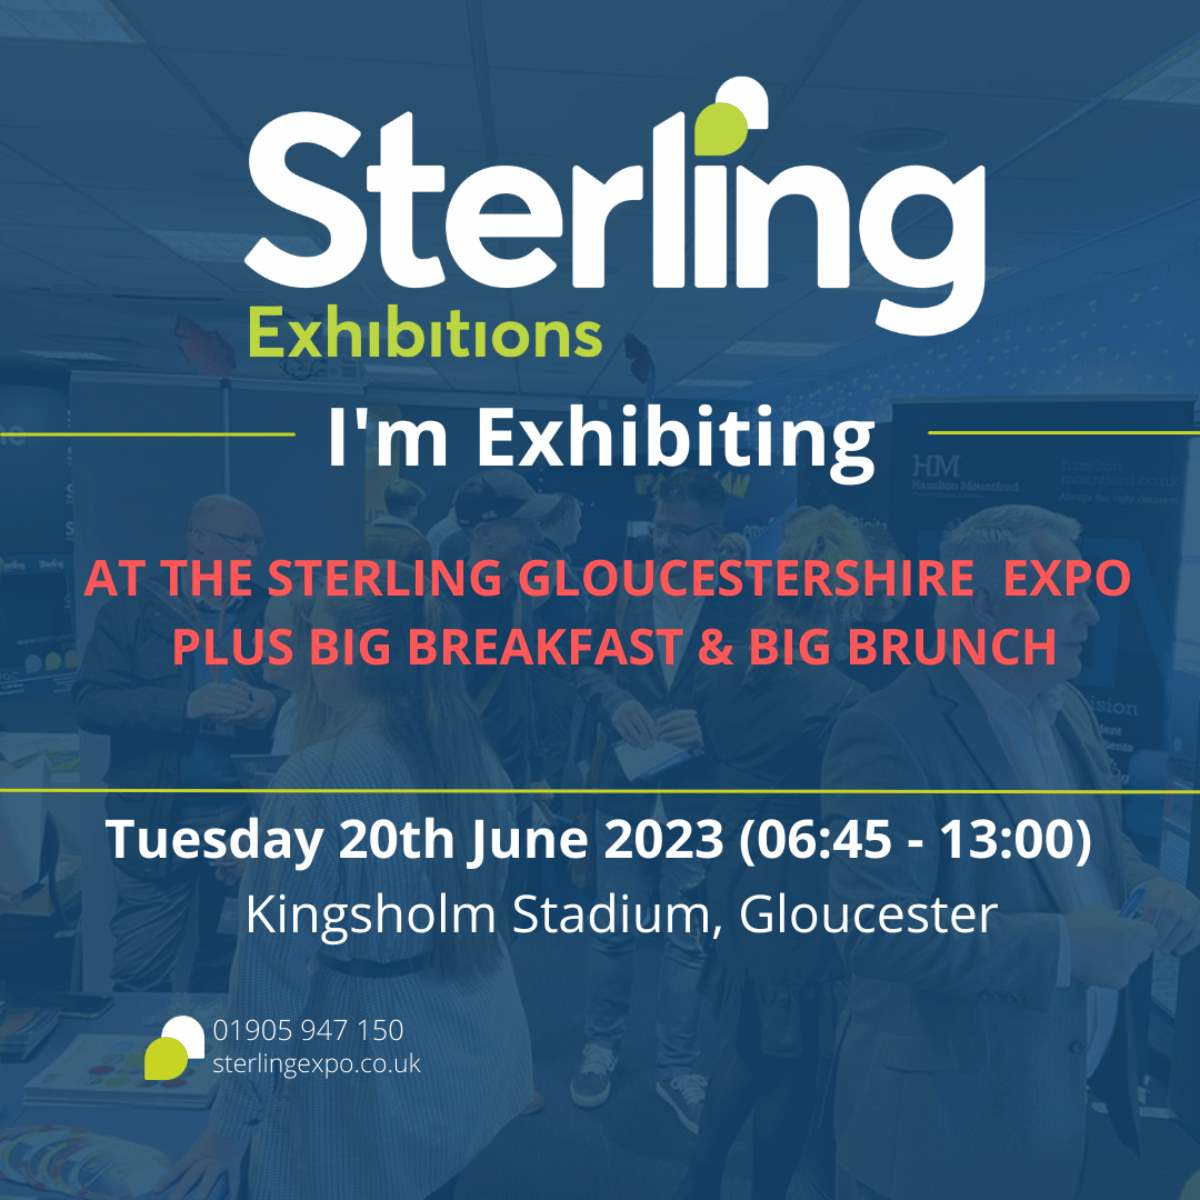 Sterling Gloucestershire Expo next Tuesday, 20th June, at the Kingsholm Stadium!